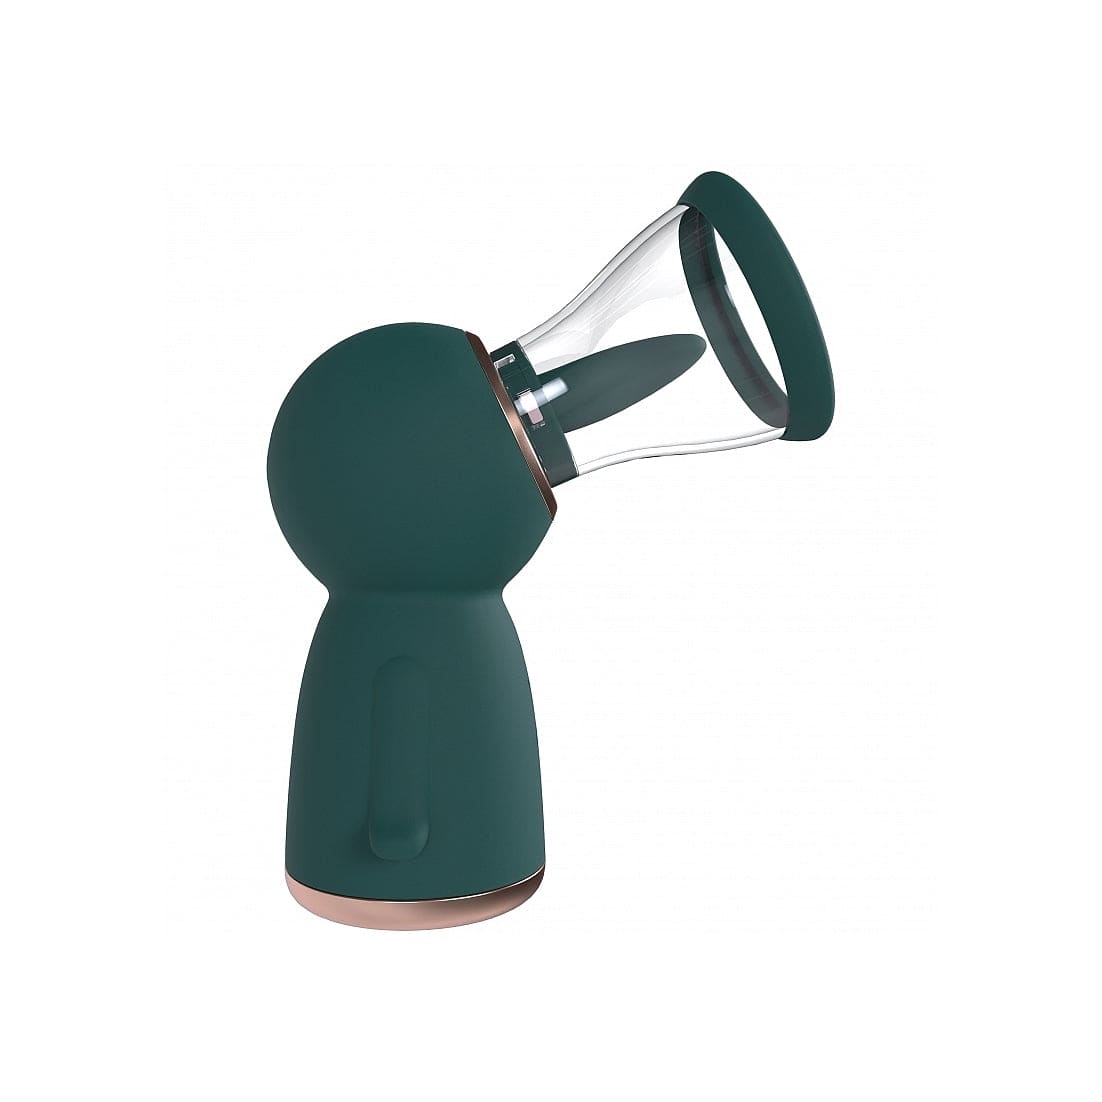 Shots Pumped Exquisite Automatic 13-Speed Silicone Rechargeable Vulva & Breast Pump Green - Rolik®